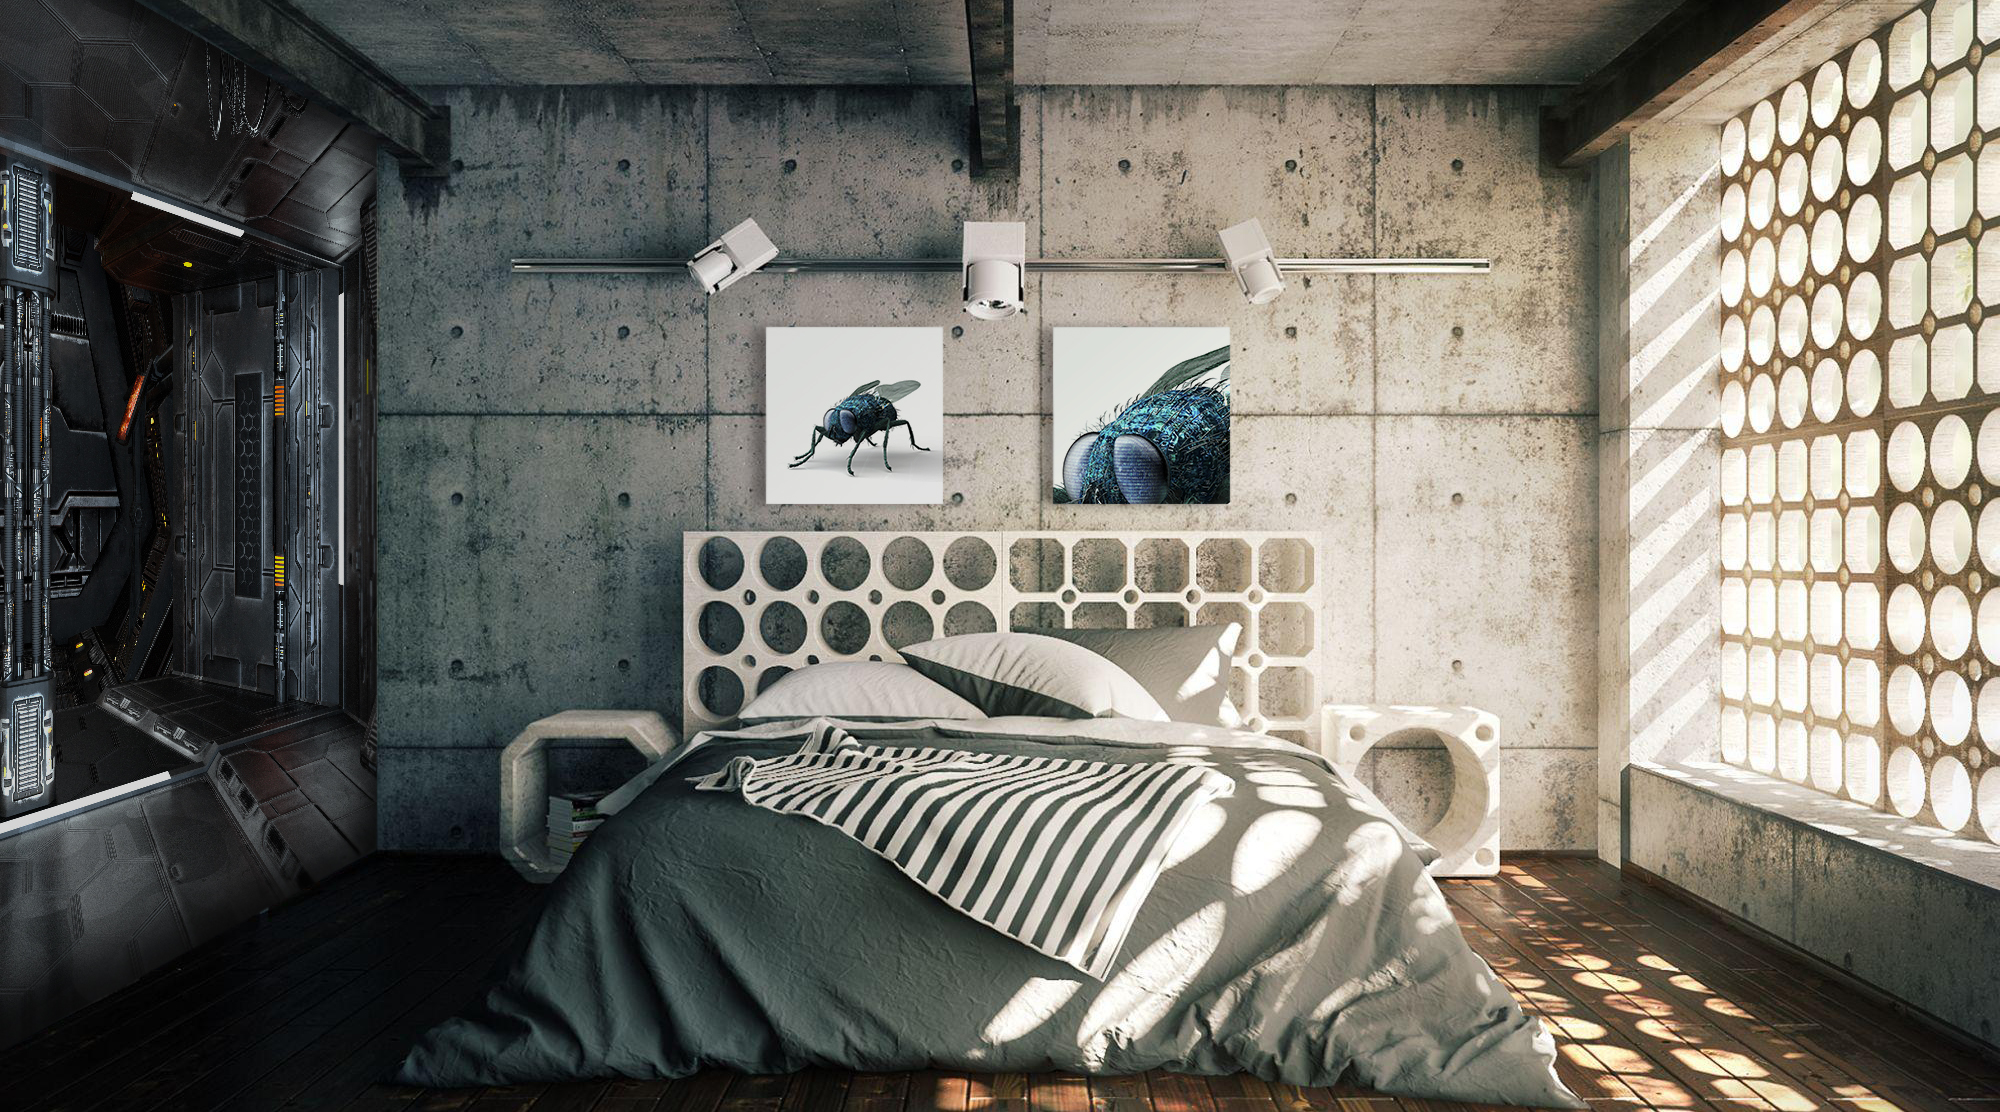 Mechanical fly • Industrial - Bedroom - Wall Murals - Prints - Architecture and buildings - Animals